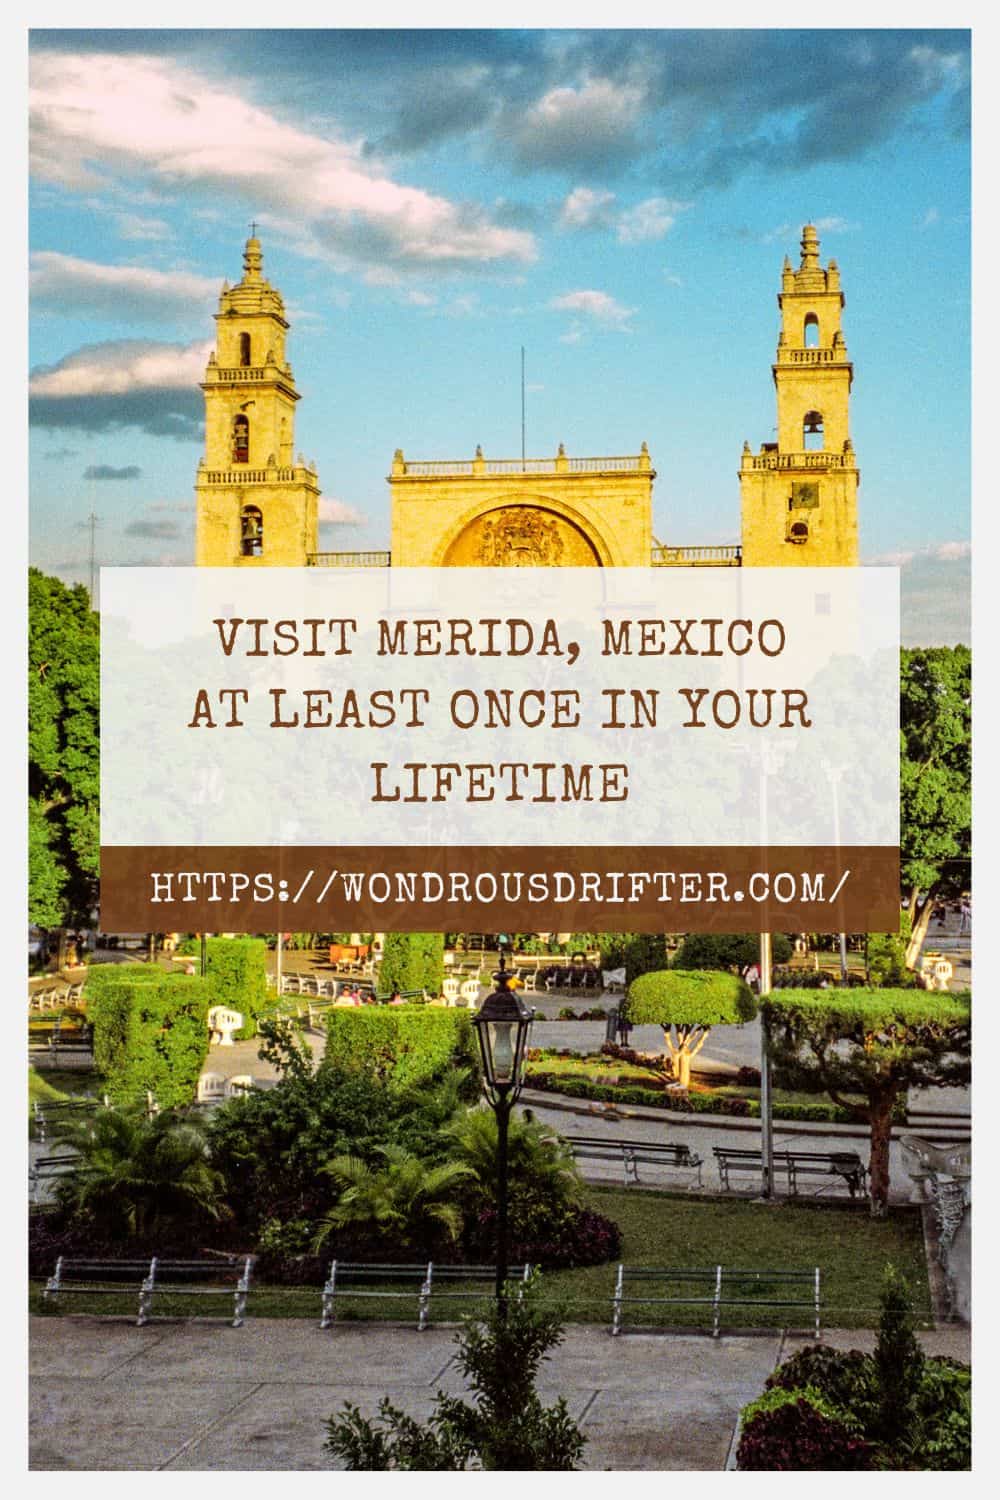 Visit Merida Mexico at least once in your lifetime